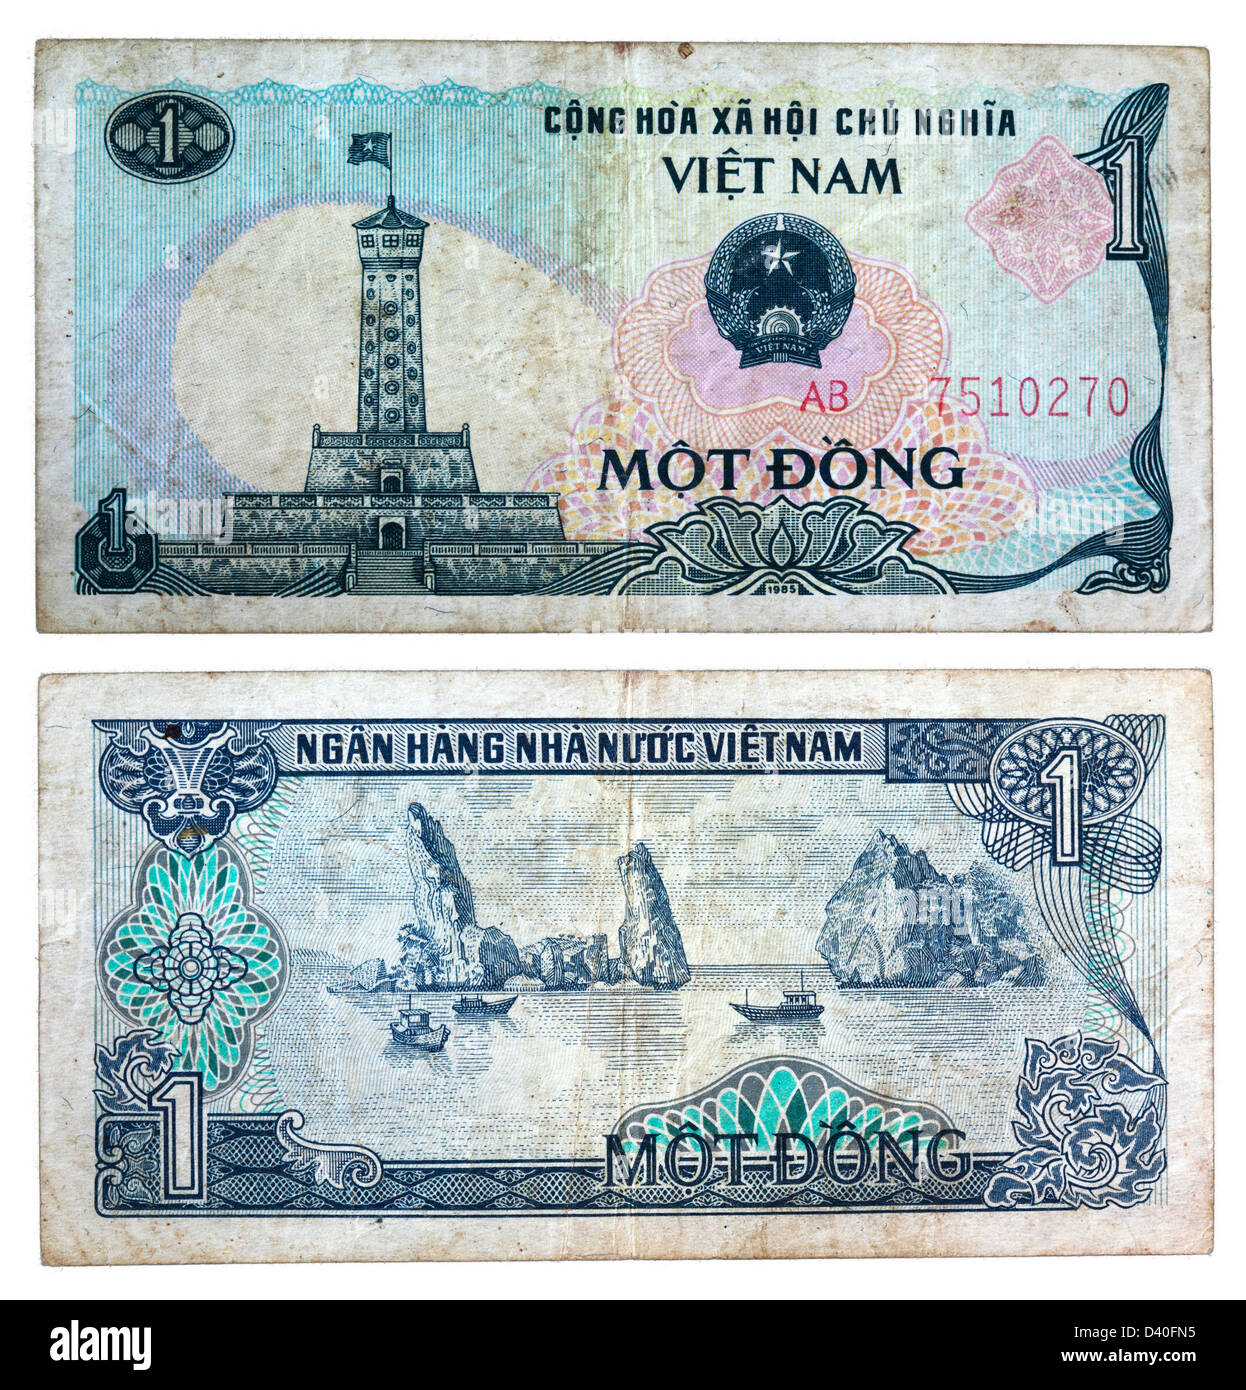 1 Dong banknote, Tower of Ha Noi and Sampans along rocky coastline, Vietnam, 1985 Stock Photo